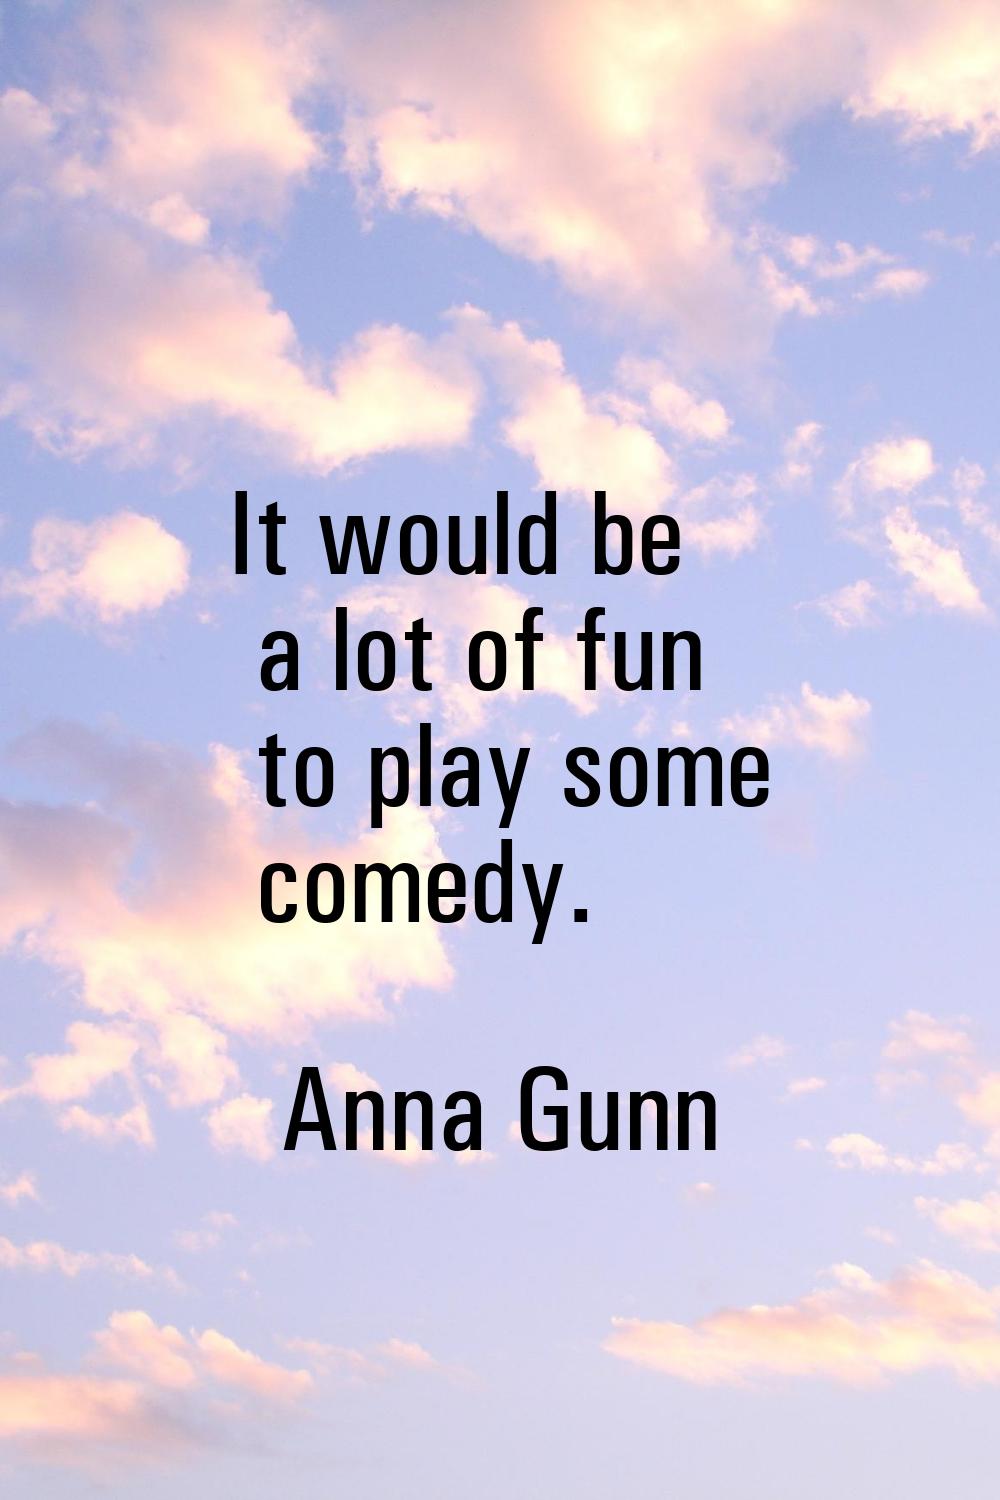 It would be a lot of fun to play some comedy.